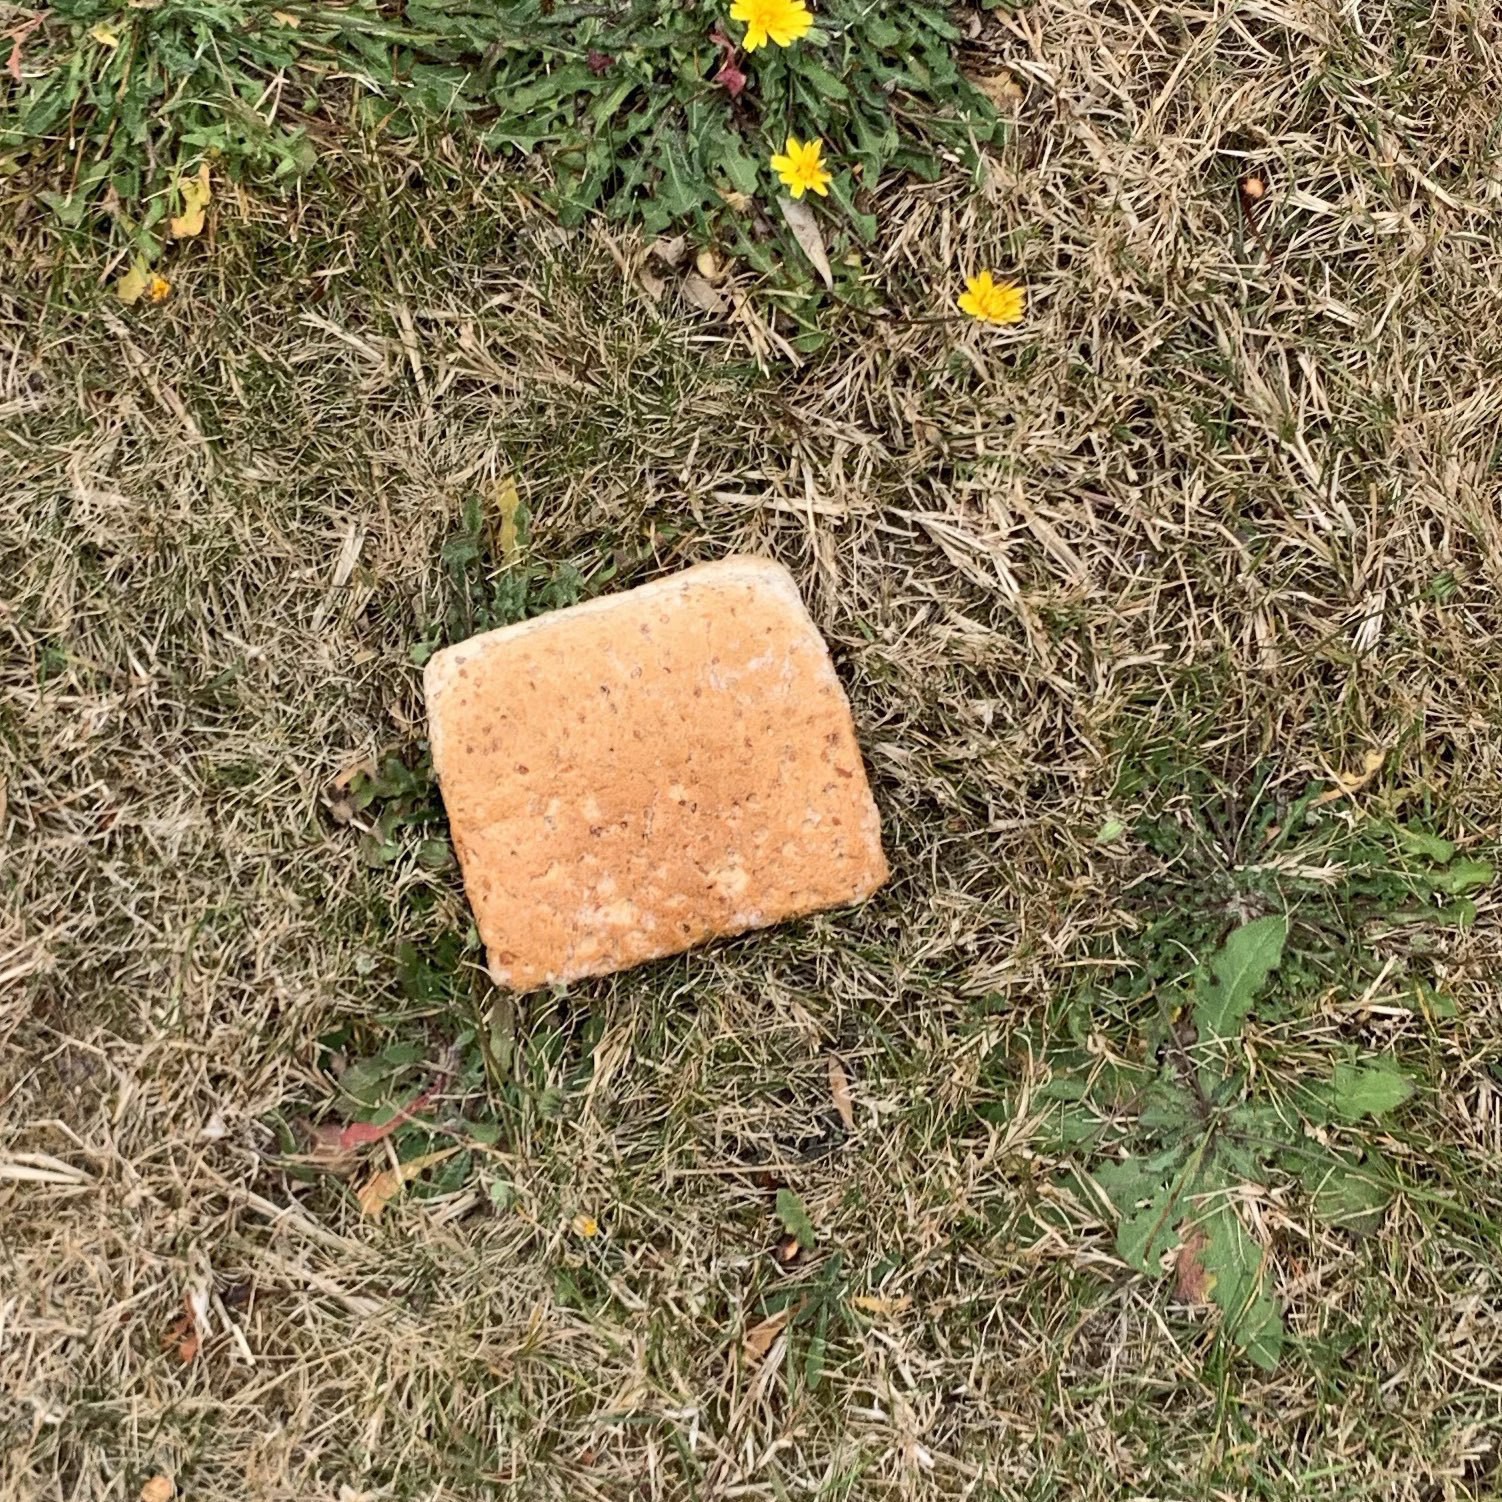 A slice of bread on the grass